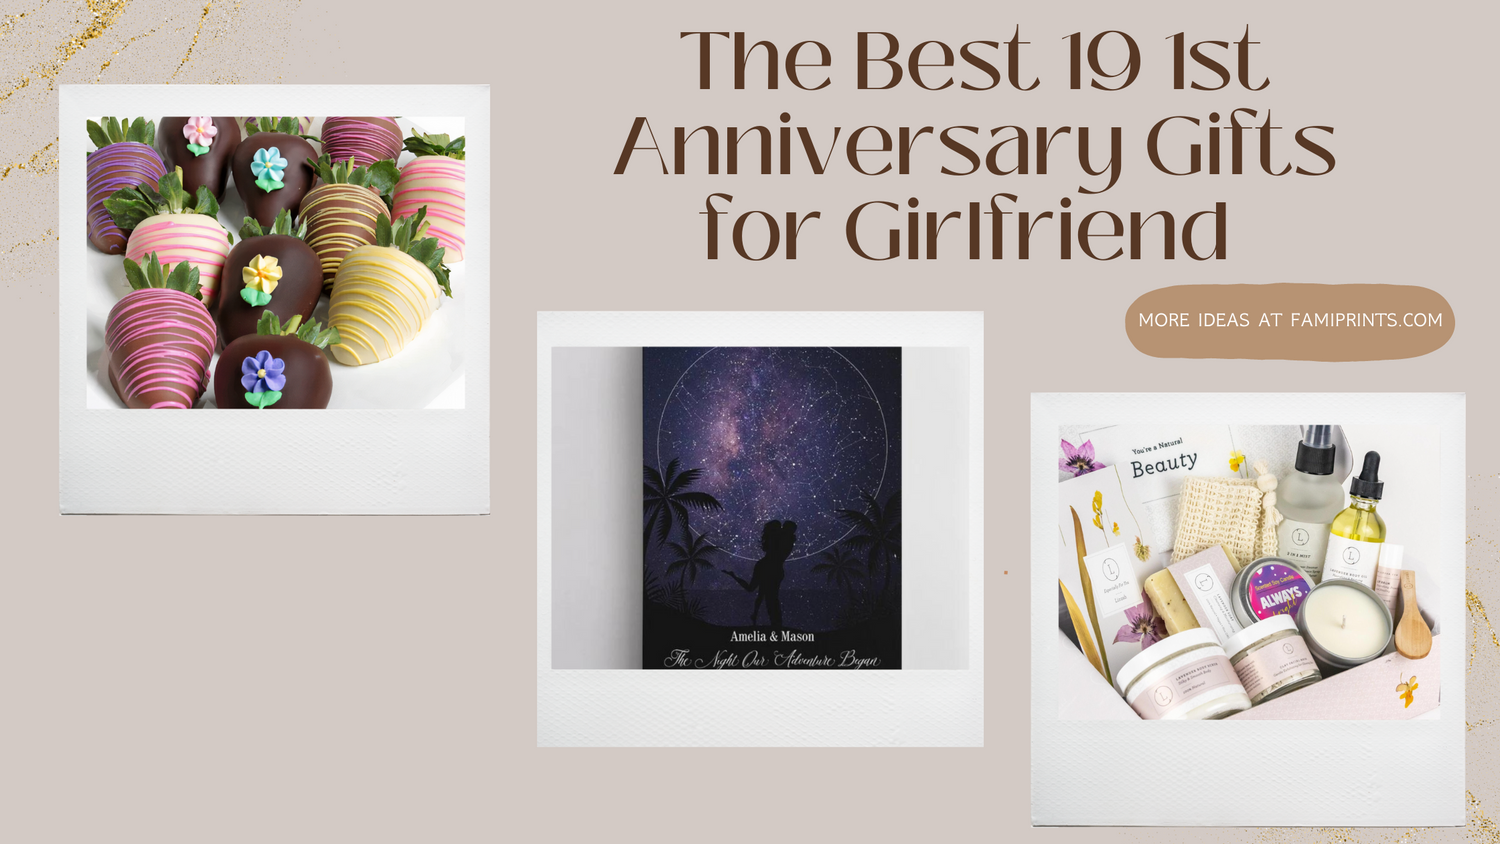 The 19 Best 1st Anniversary Gifts for Girlfriend